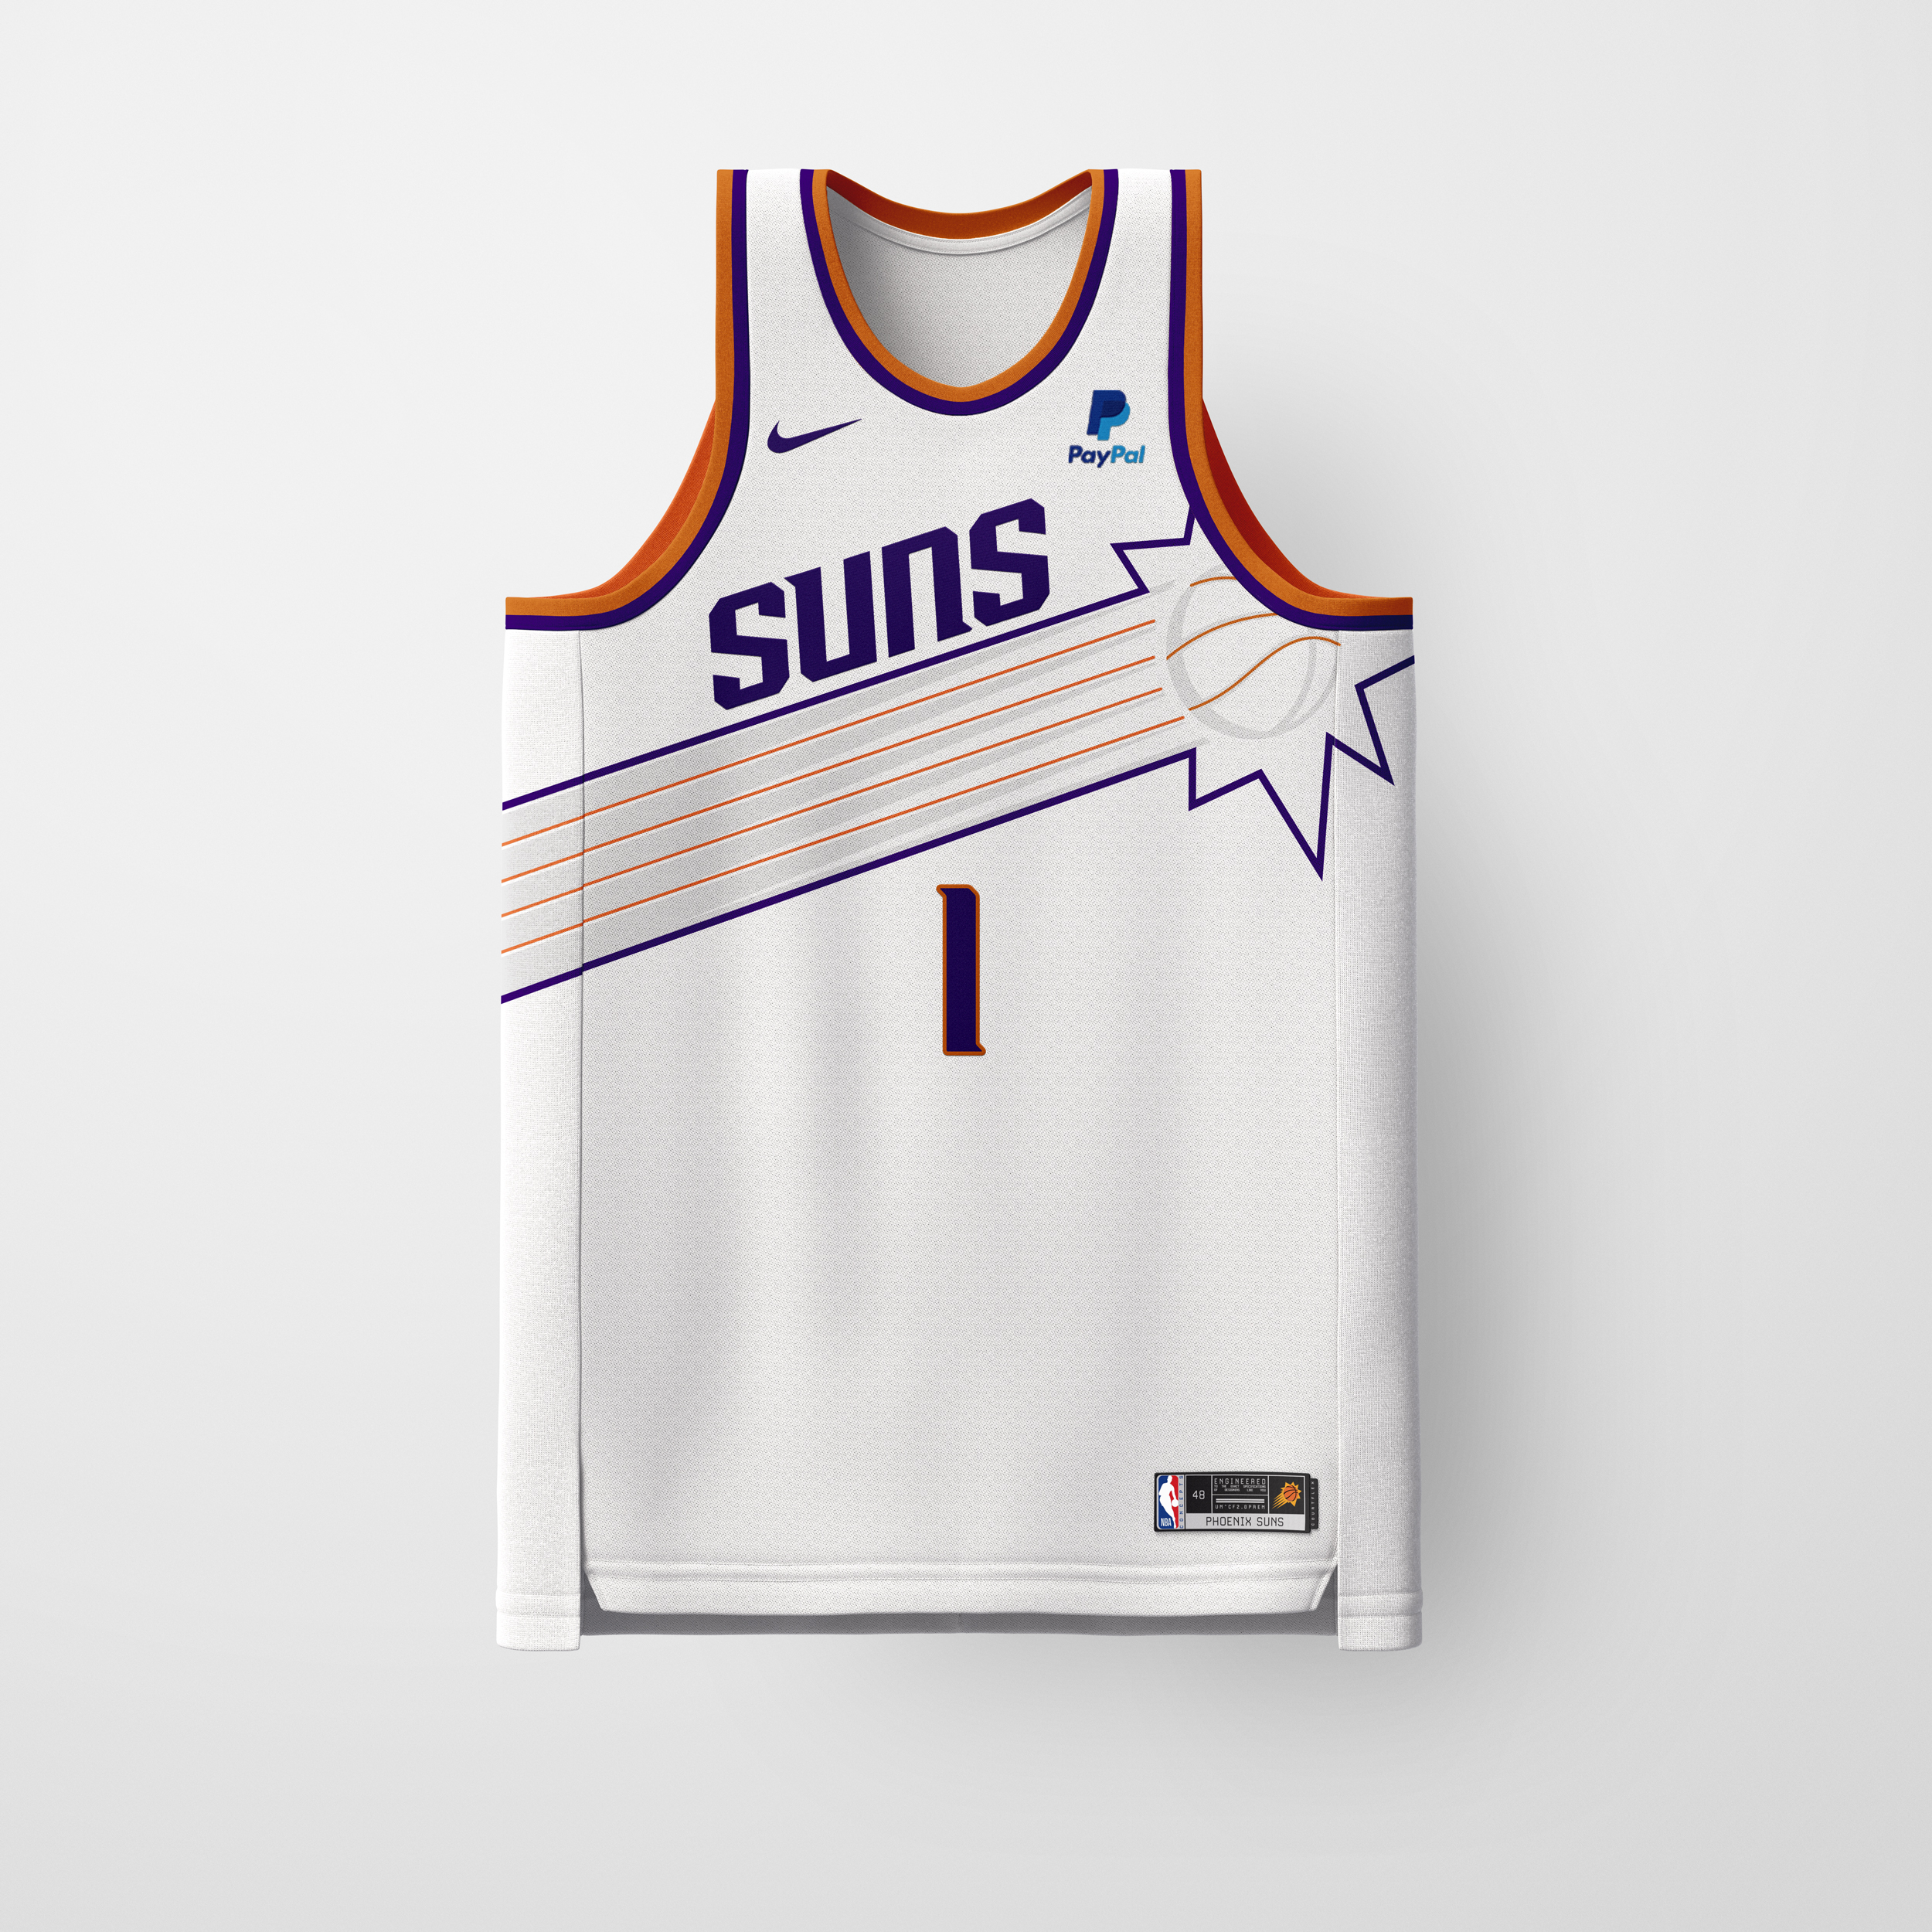 Suns Uniform Tracker on X: Here's my most recent predictions for